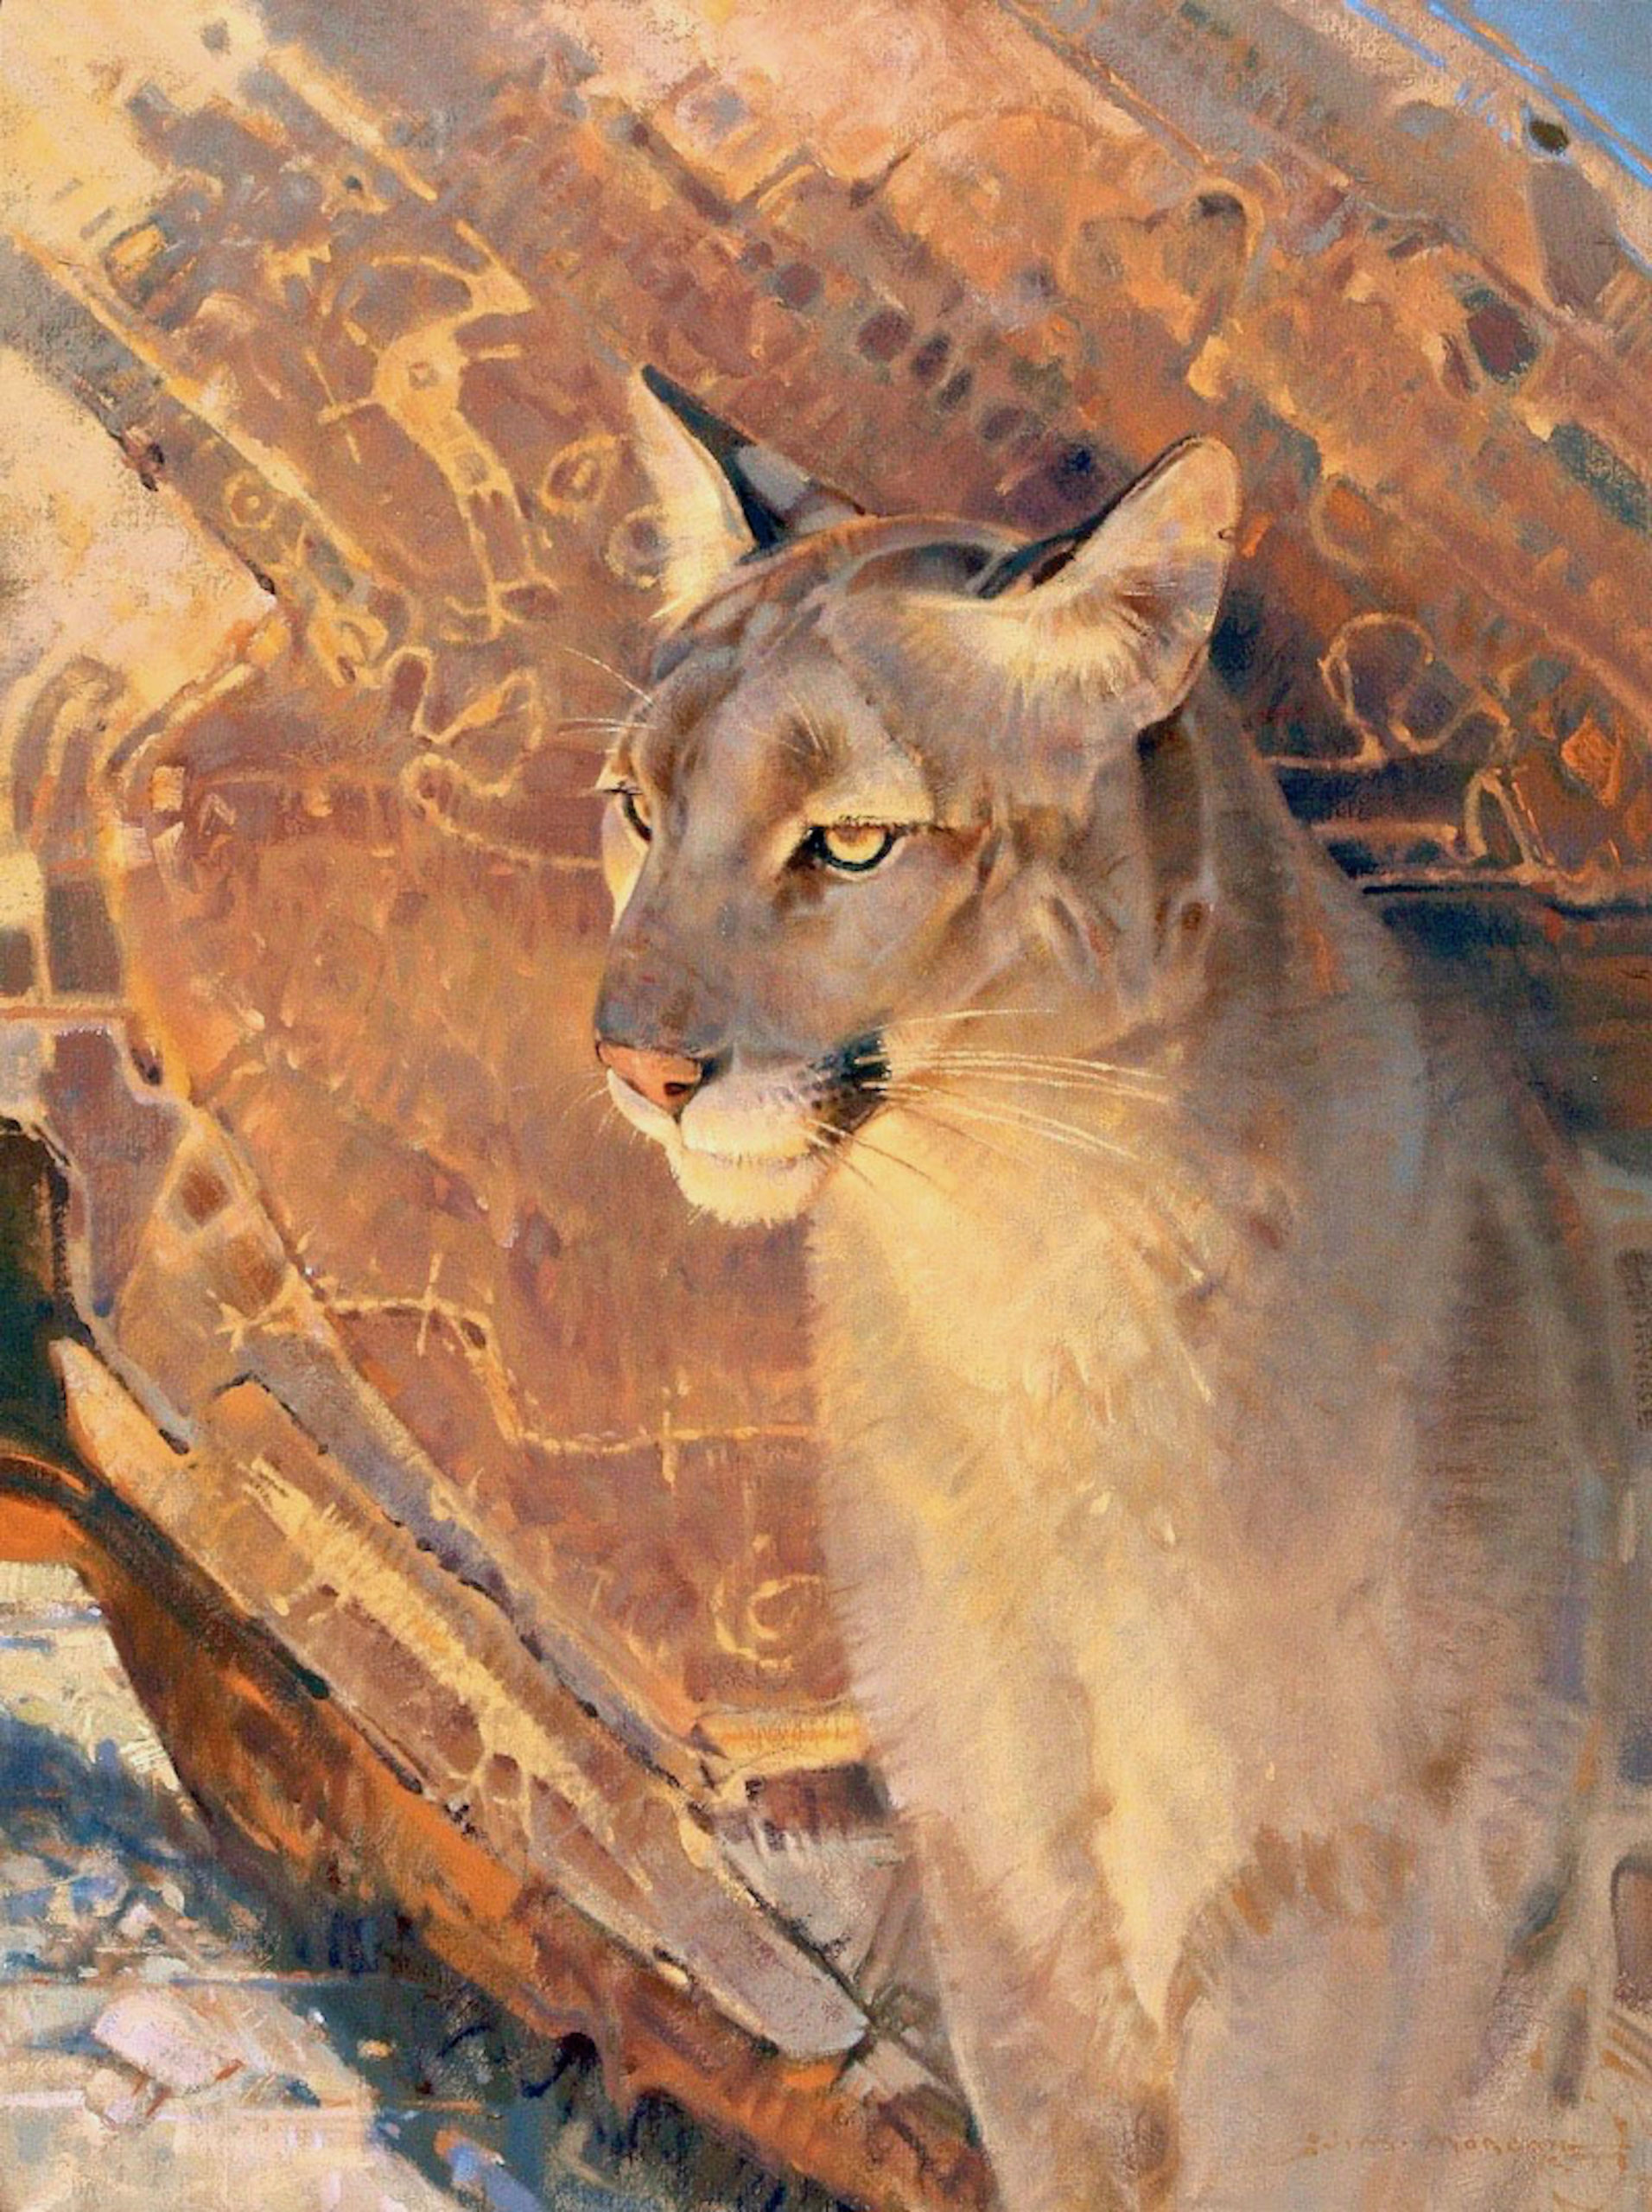 
		                					James Morgan		                																	
																											<i>Cat of Many Names,</i>  
																																								2021, 
																																								oil on linen, 
																																								24 x 18 inches 
																								
		                				